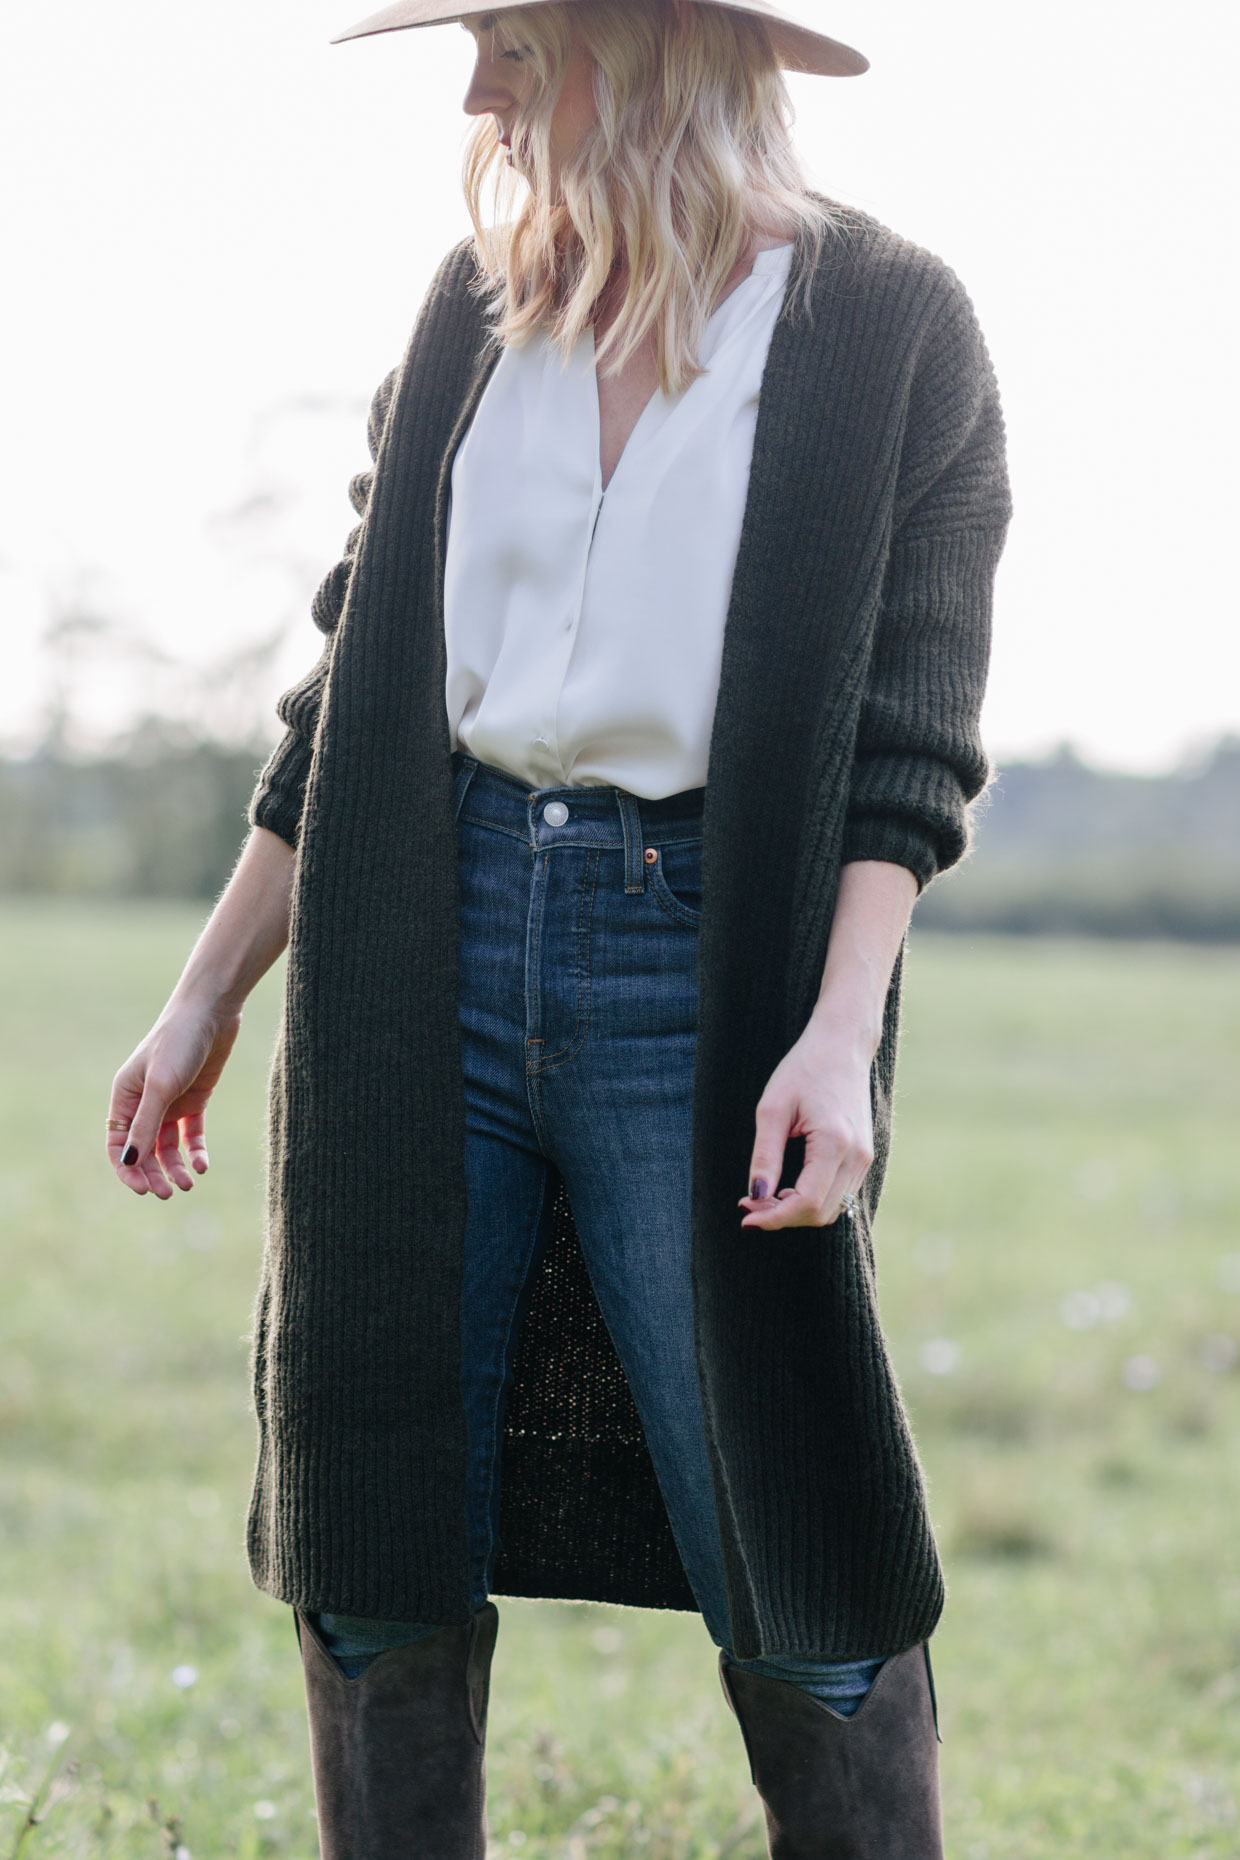 Styling an Oversized Cardigan For Fall - Meagan's Moda